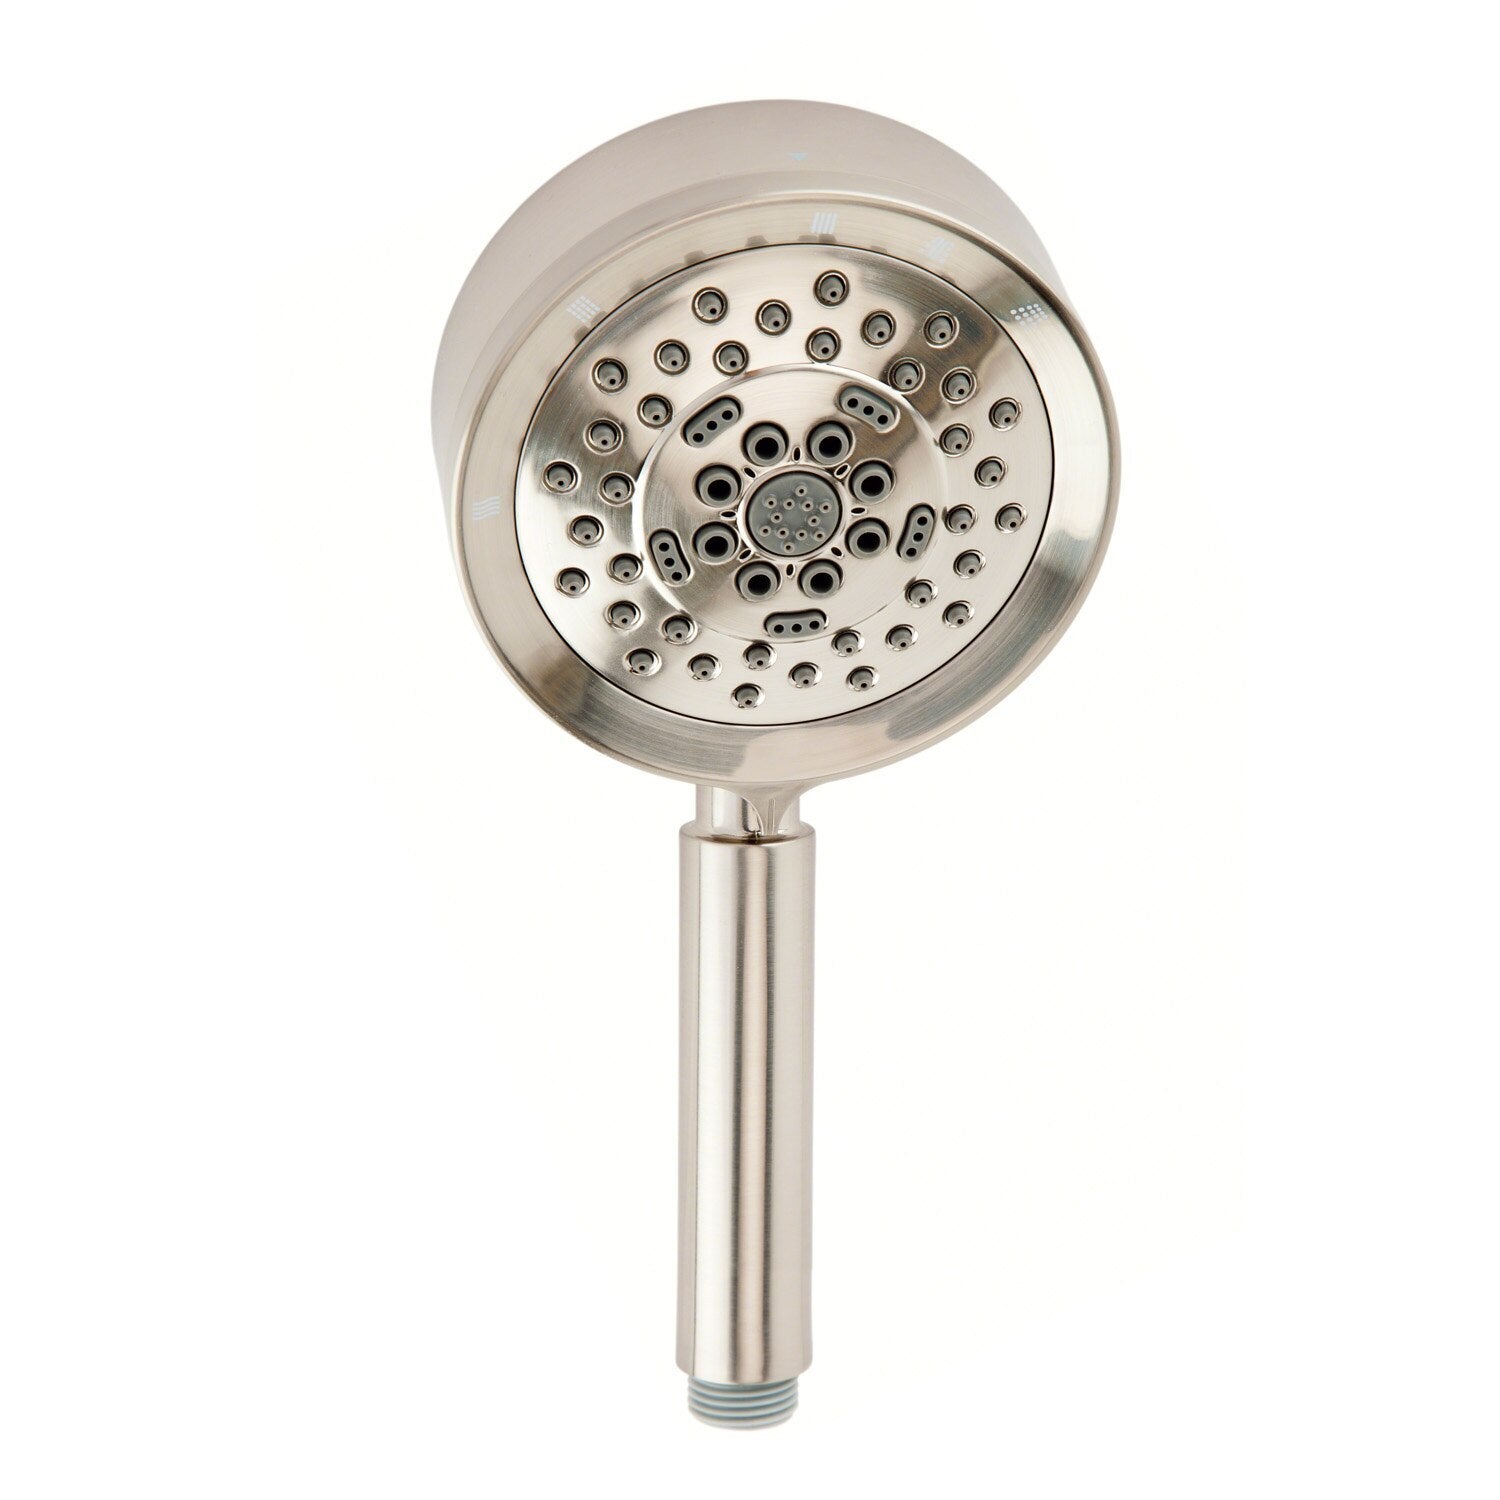 Danze by Gerber Parma 5 Function Handshower 1.75gpm